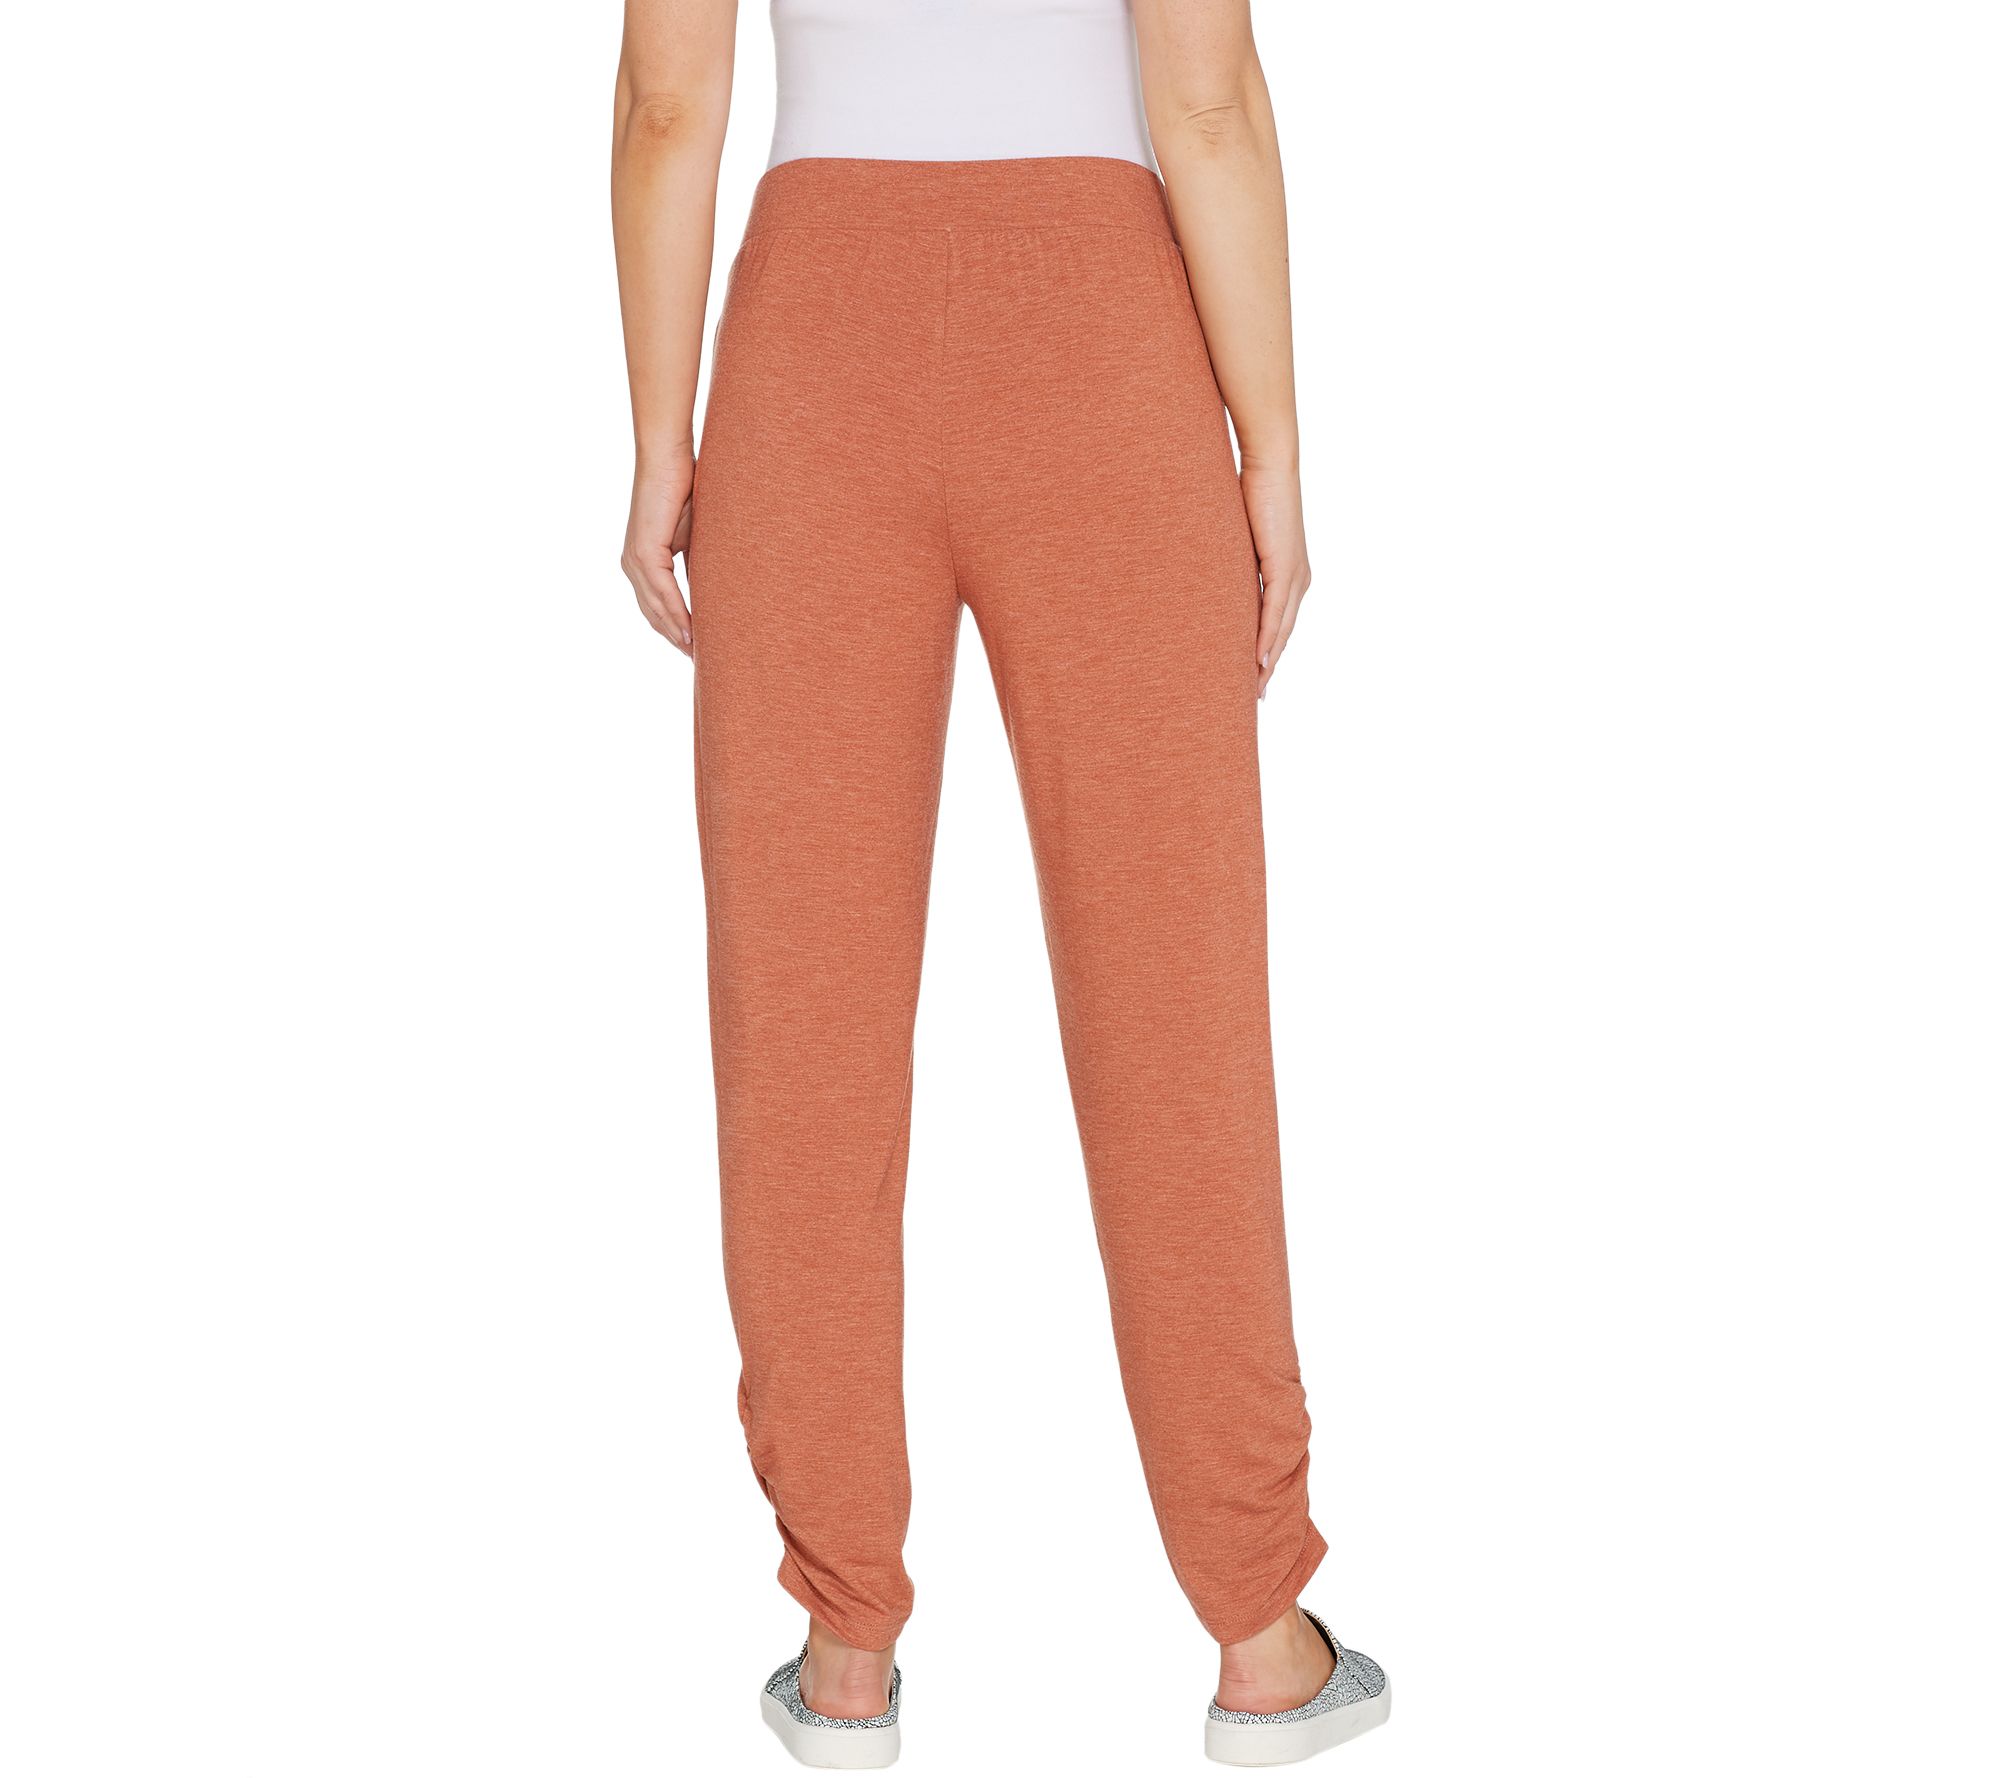 LOGO Lounge by Lori Goldstein Jersey Pull-On Ankle Pants - QVC.com